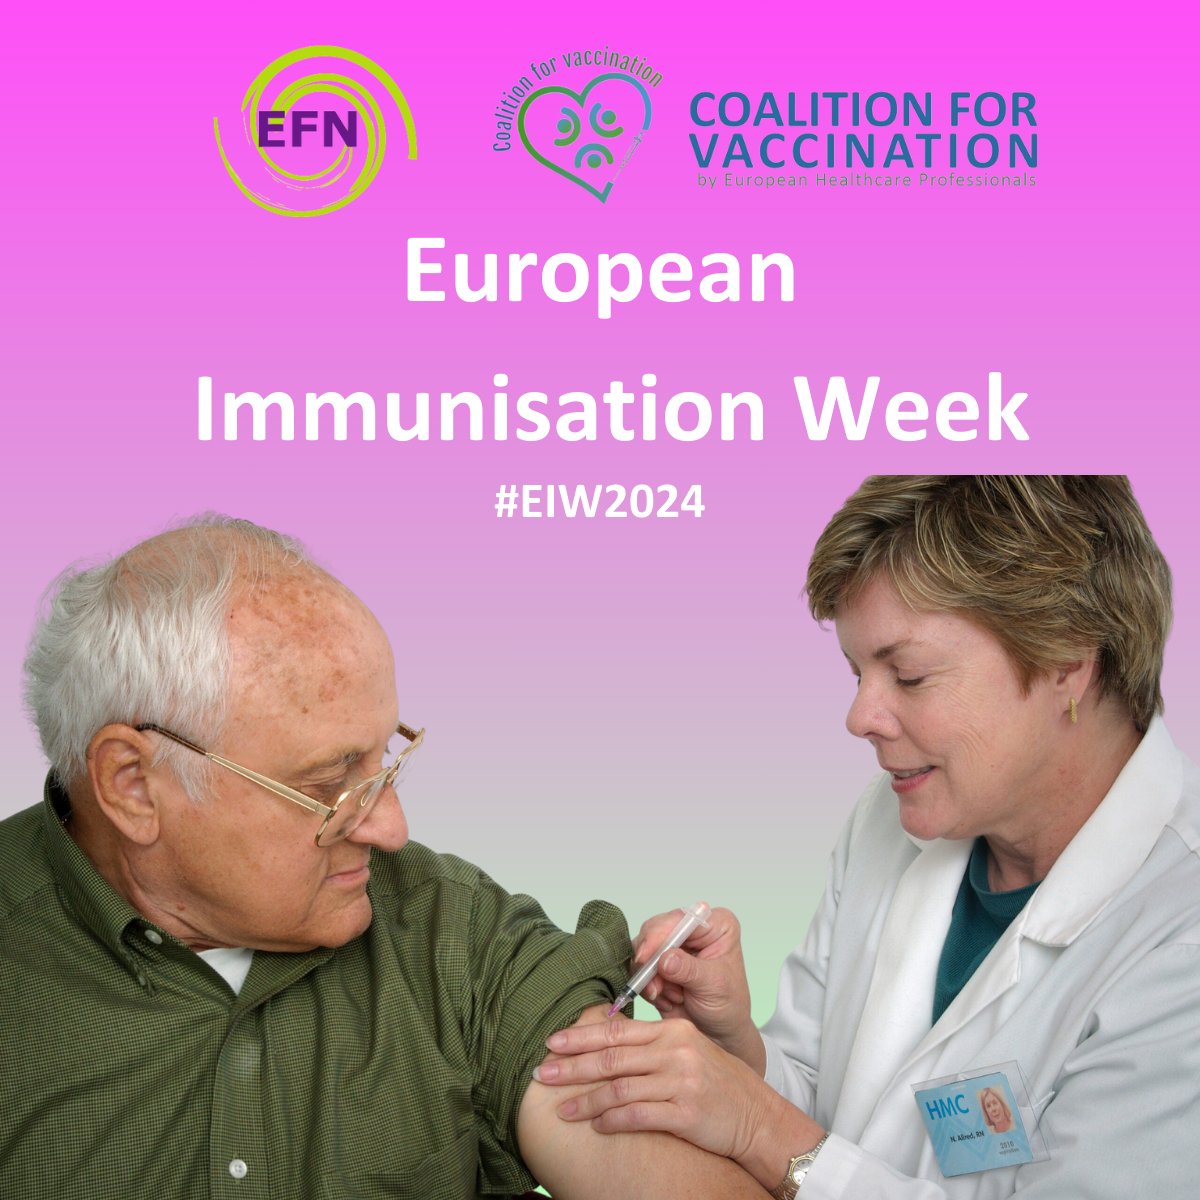 Vaccines are safe at all ages! Listen to your healthcare provider and make sure to be up to date with your immunisation. #EFN #EIW2024 #GetVaccinated #Nursesforvaccination #Nurses #Prevention #Longlifeforall #EPI #vaccination #coalitionforvaccination #UnitedInProtection